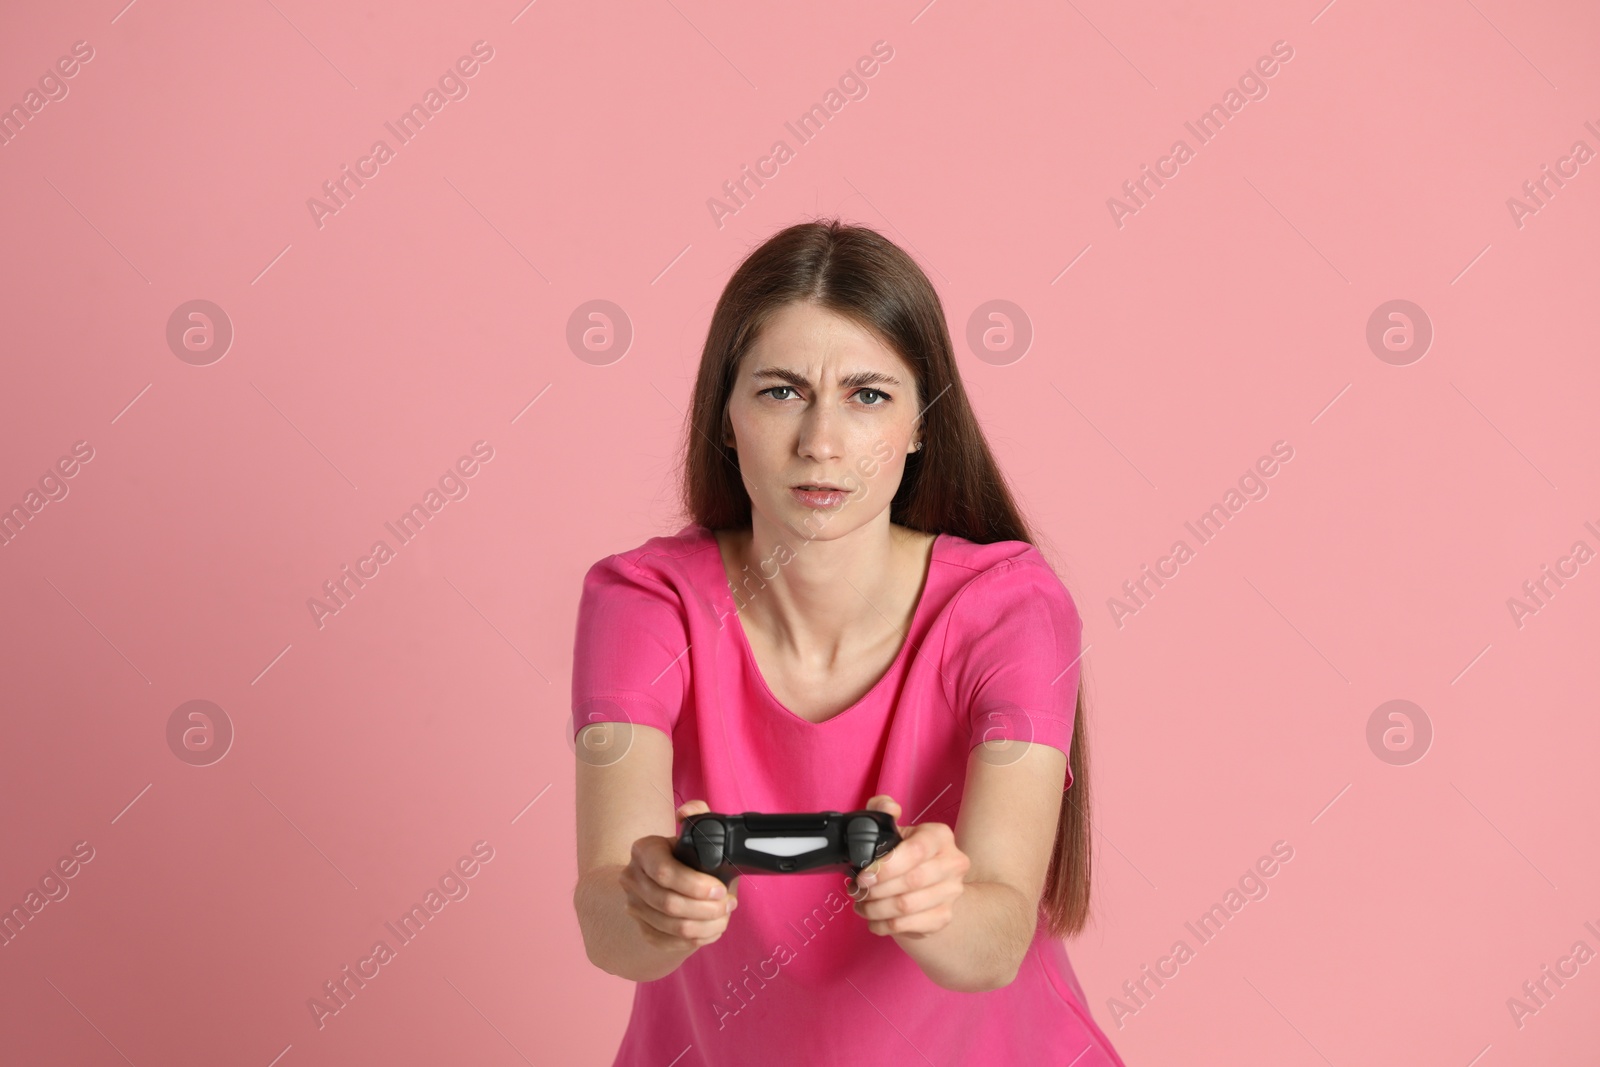 Photo of Woman playing video games with controller on pink background